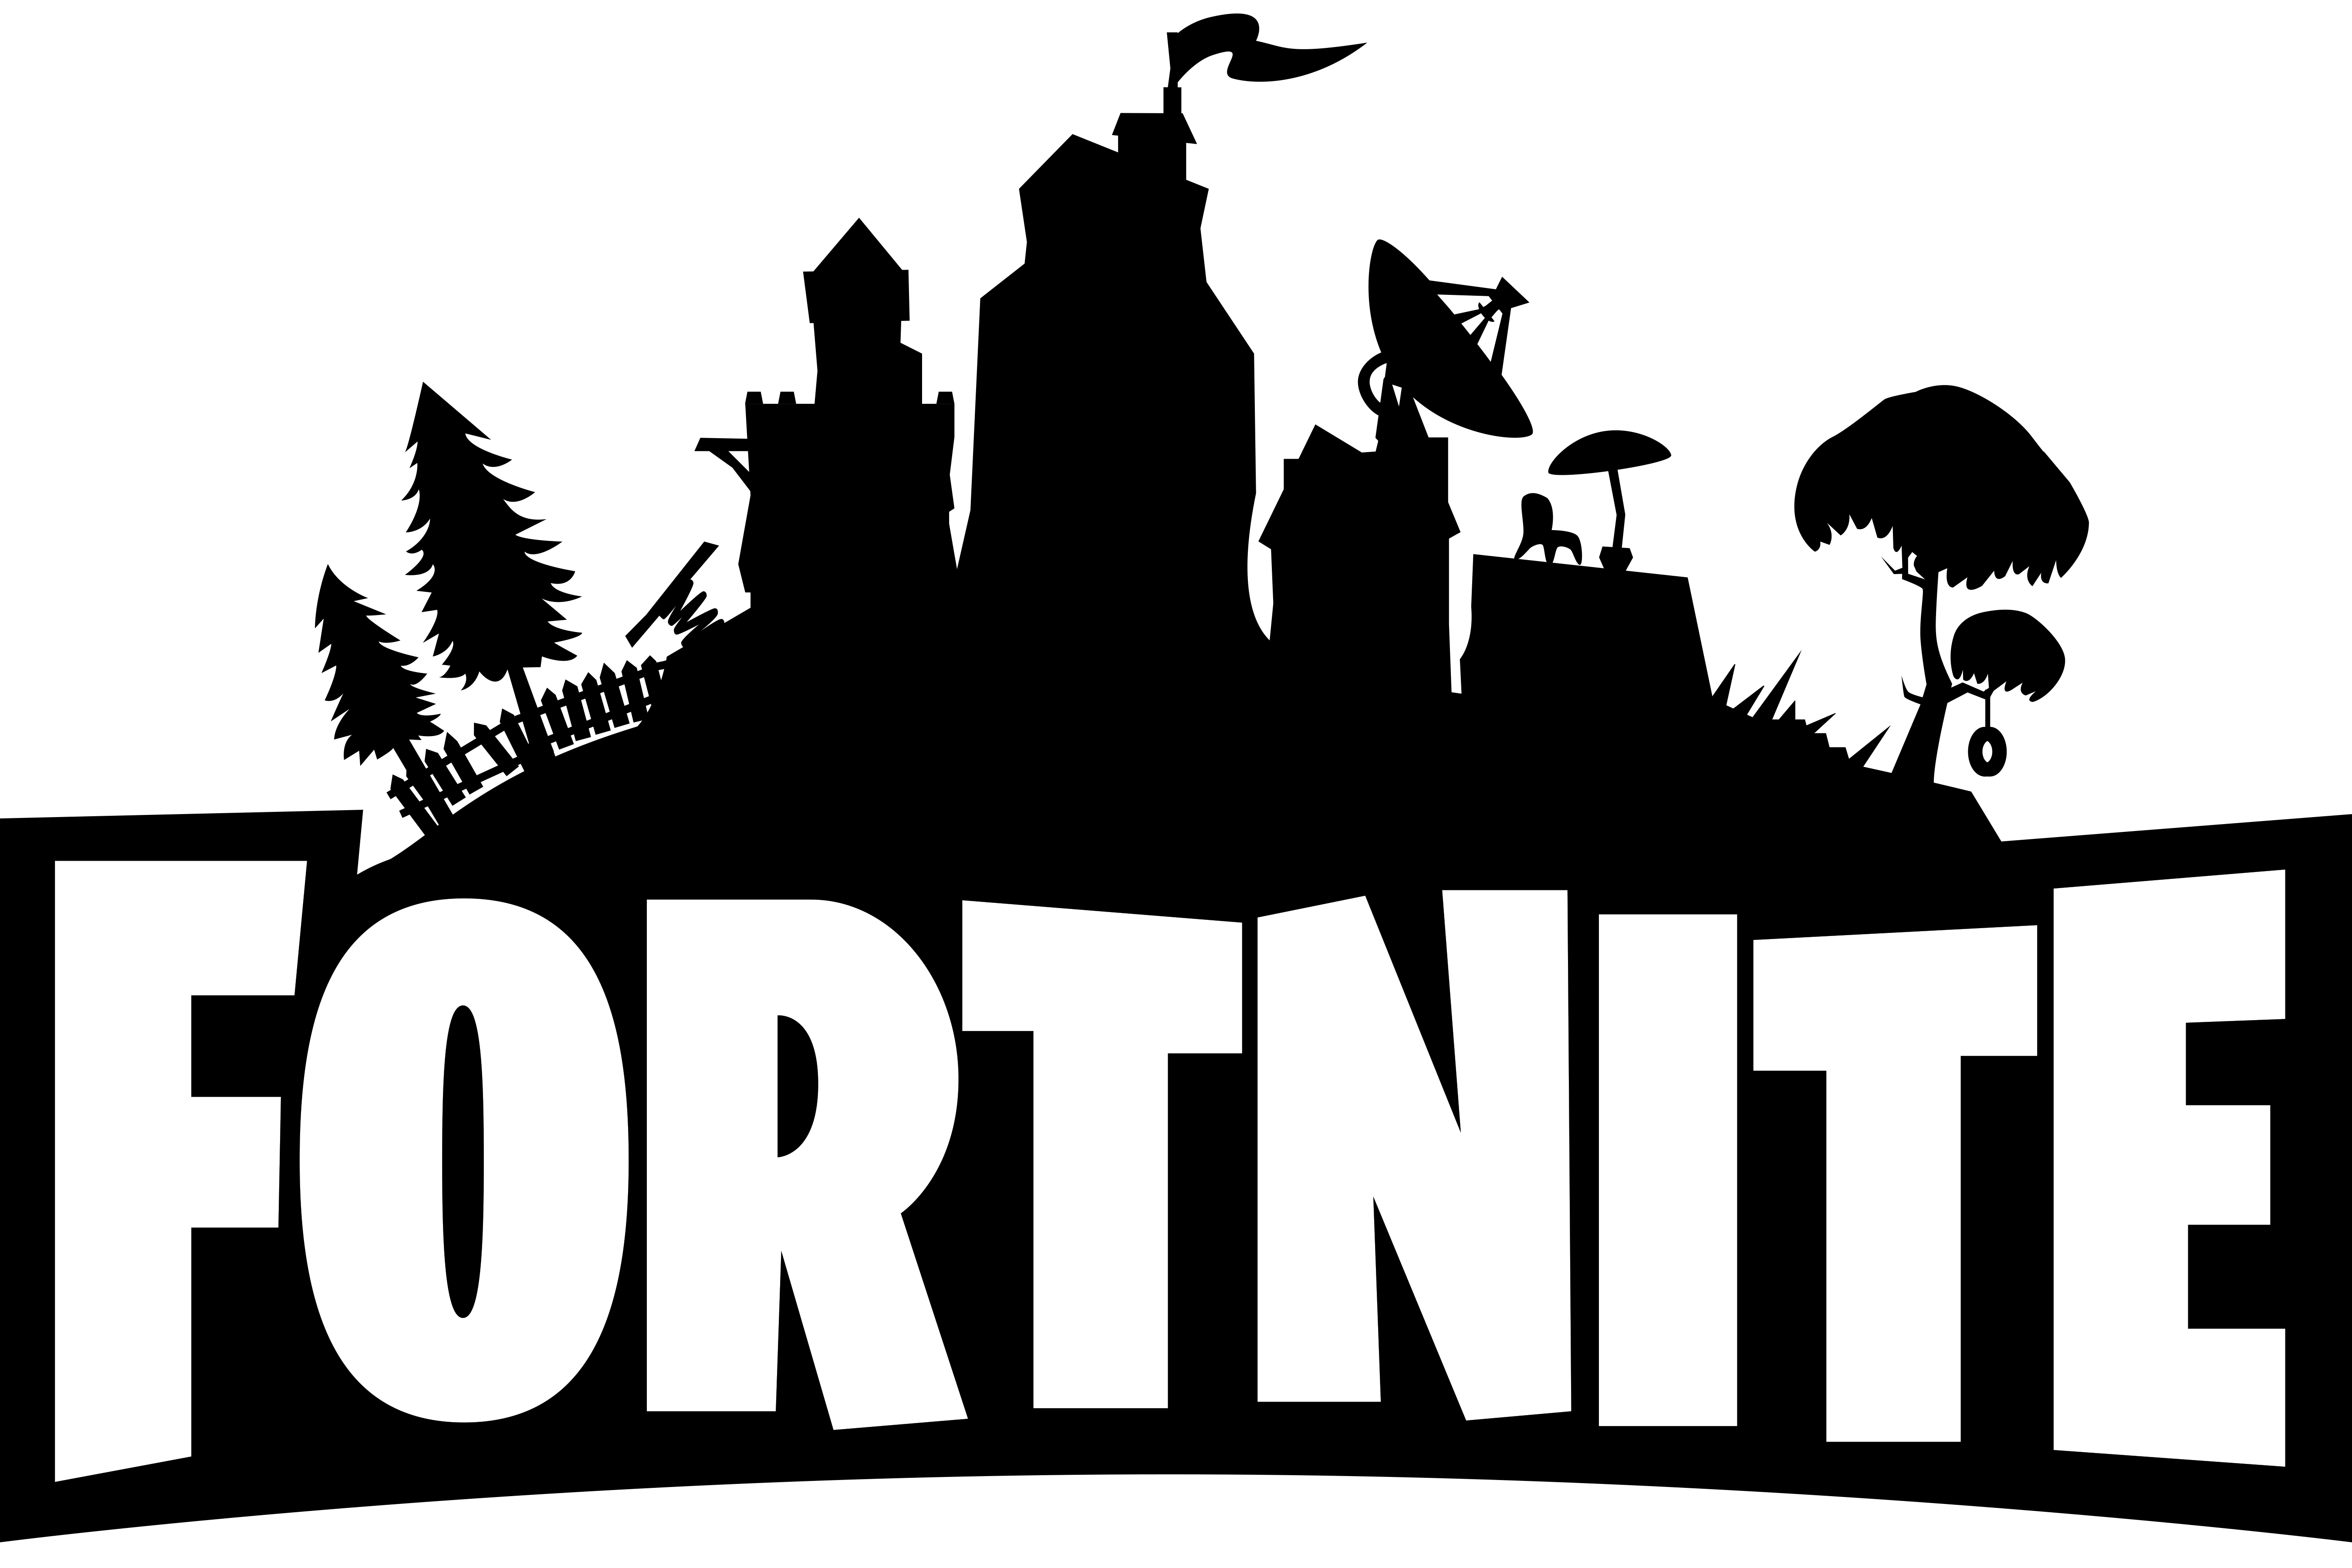 Free download Fortnite Wallpaper Battle Royale Video Game 4075 Wallpapers  and 3840x2160 for your Desktop Mobile  Tablet  Explore 19 Fortnite  Logo Wallpapers  Fortnite Wallpaper Fortnite Wallpapers Maven Fortnite  Wallpapers